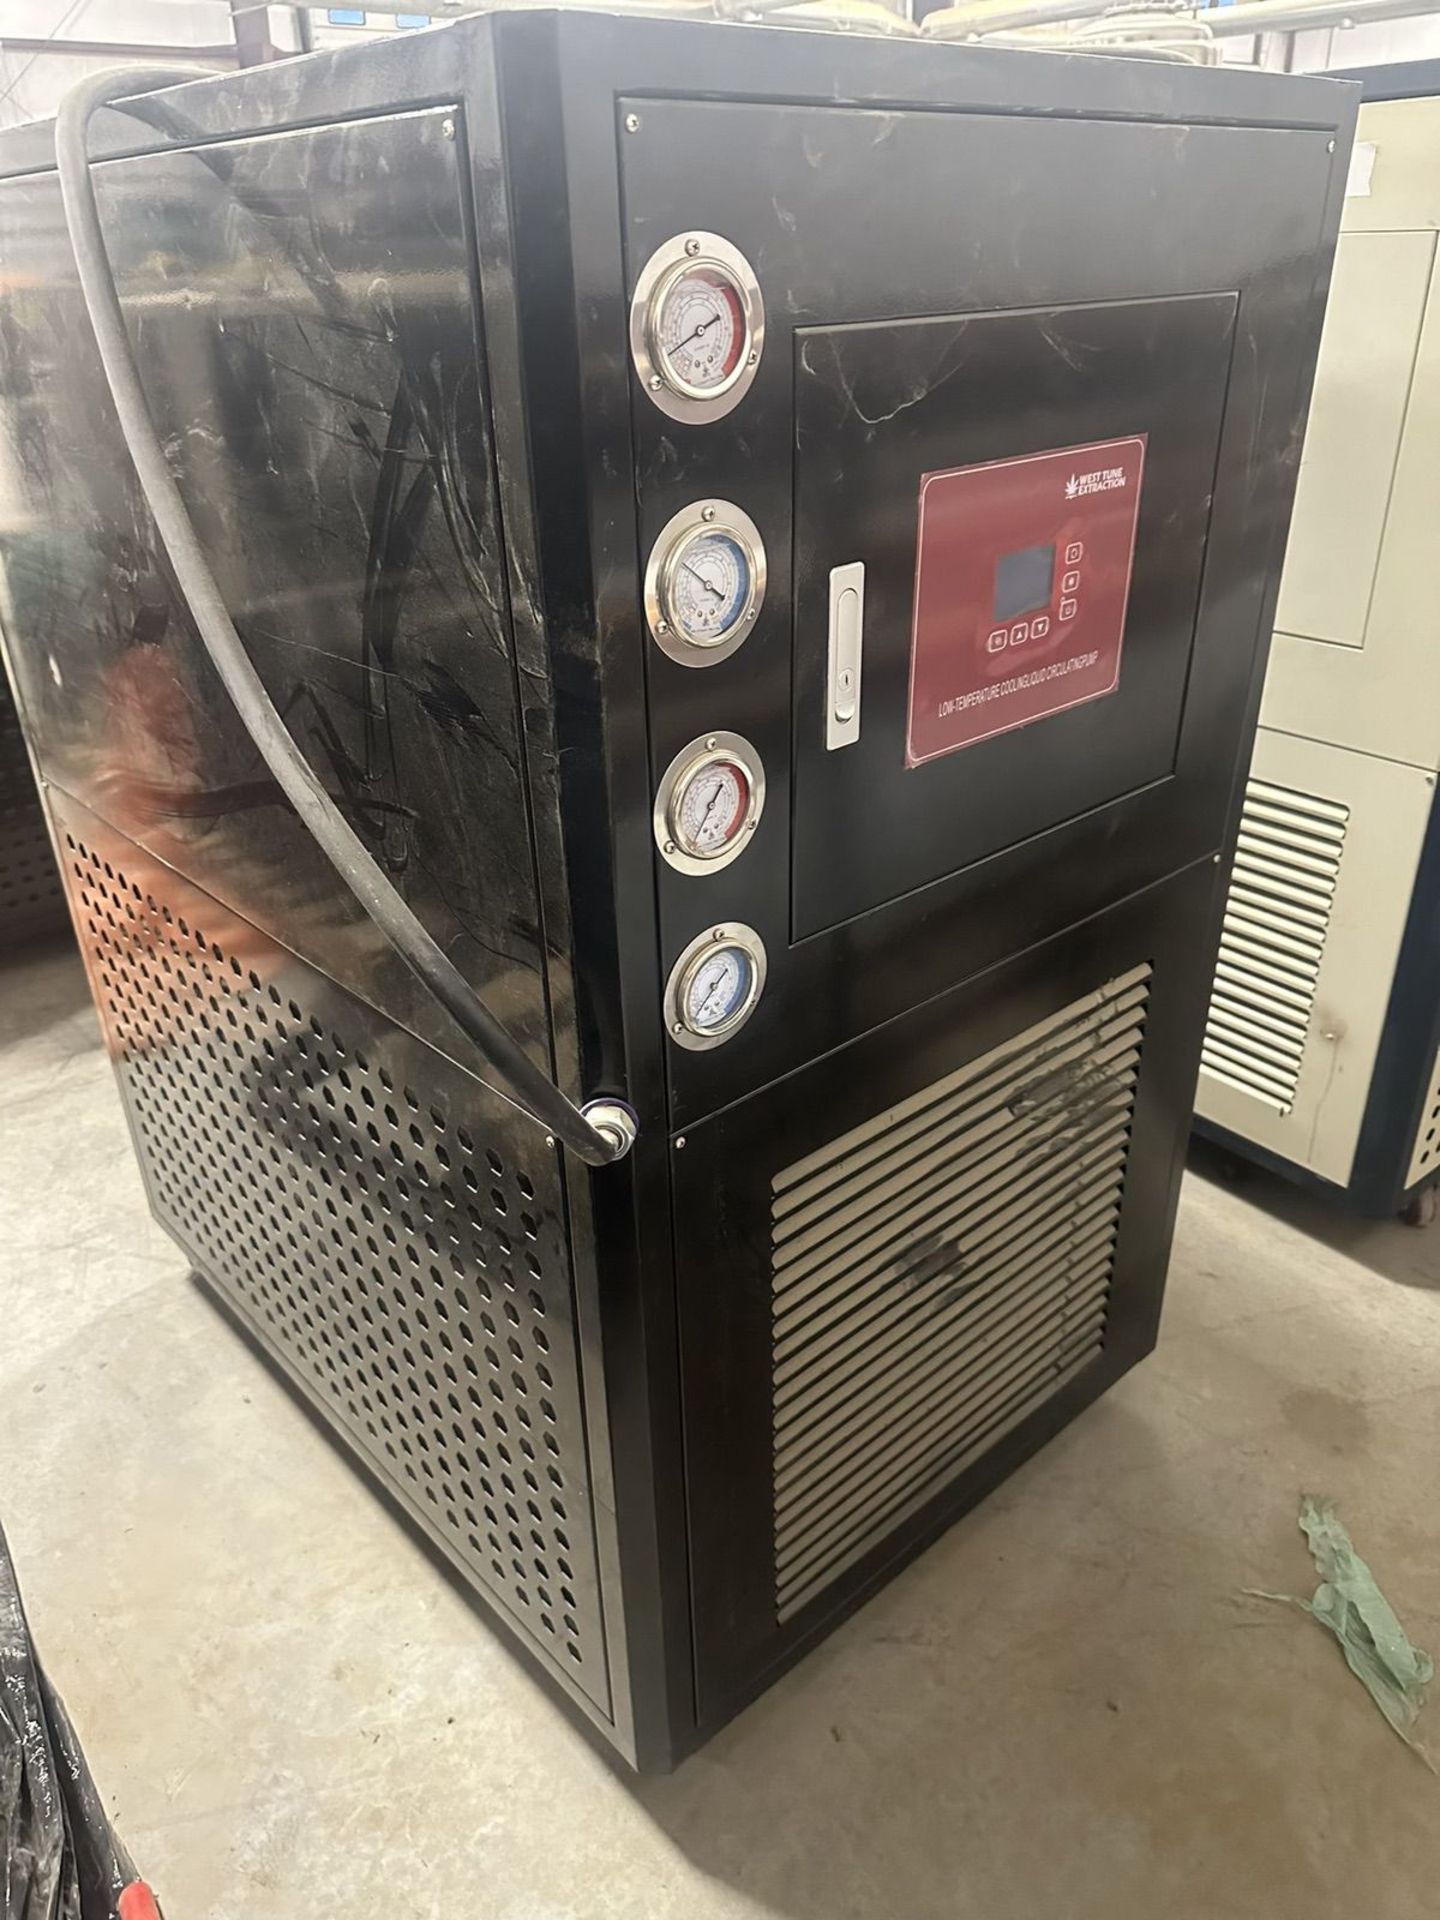 West Tune Extraction Refrigerated Circulator, Model, DLSB-50/80 Year 2019 | Rig Fee $200